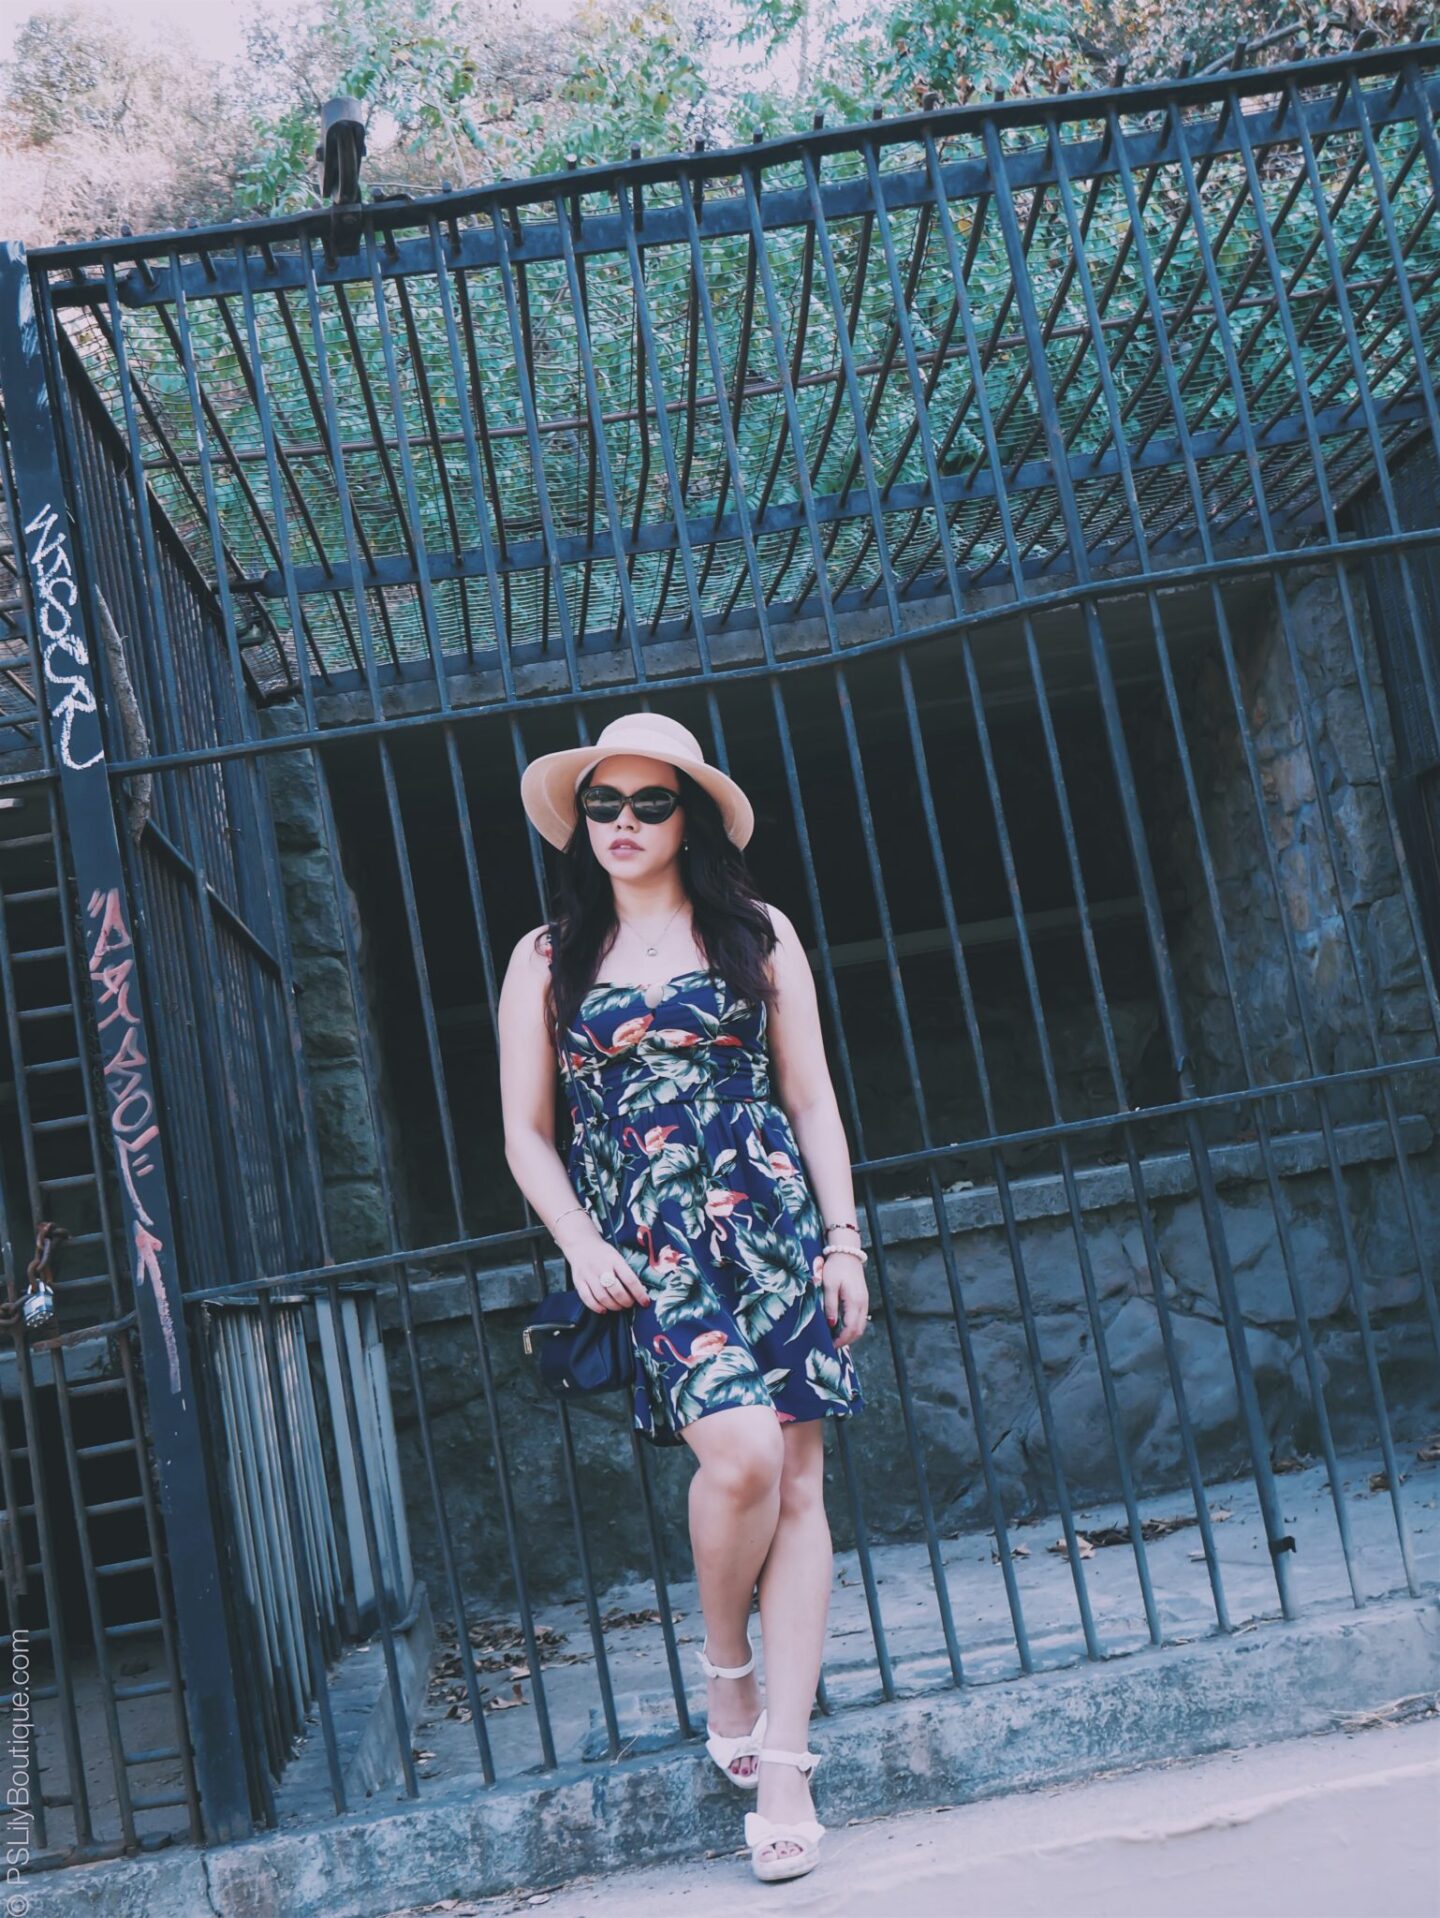 Extra Tropical... | PSLily Boutique - A Fashion & Personal Style Blog. Instagram: @pslilyboutique, Pinterest, Los Angeles fashion blogger, top fashion blog, best fashion blog, fashion & personal style blog, travel blog, travel blogger, LA fashion blogger, Spring & Summer 2018 Outfit Ideas, Navy Blue Palm Print & Flamingo Sun Dress, Travel Outfit, OOTD, 8.15.18